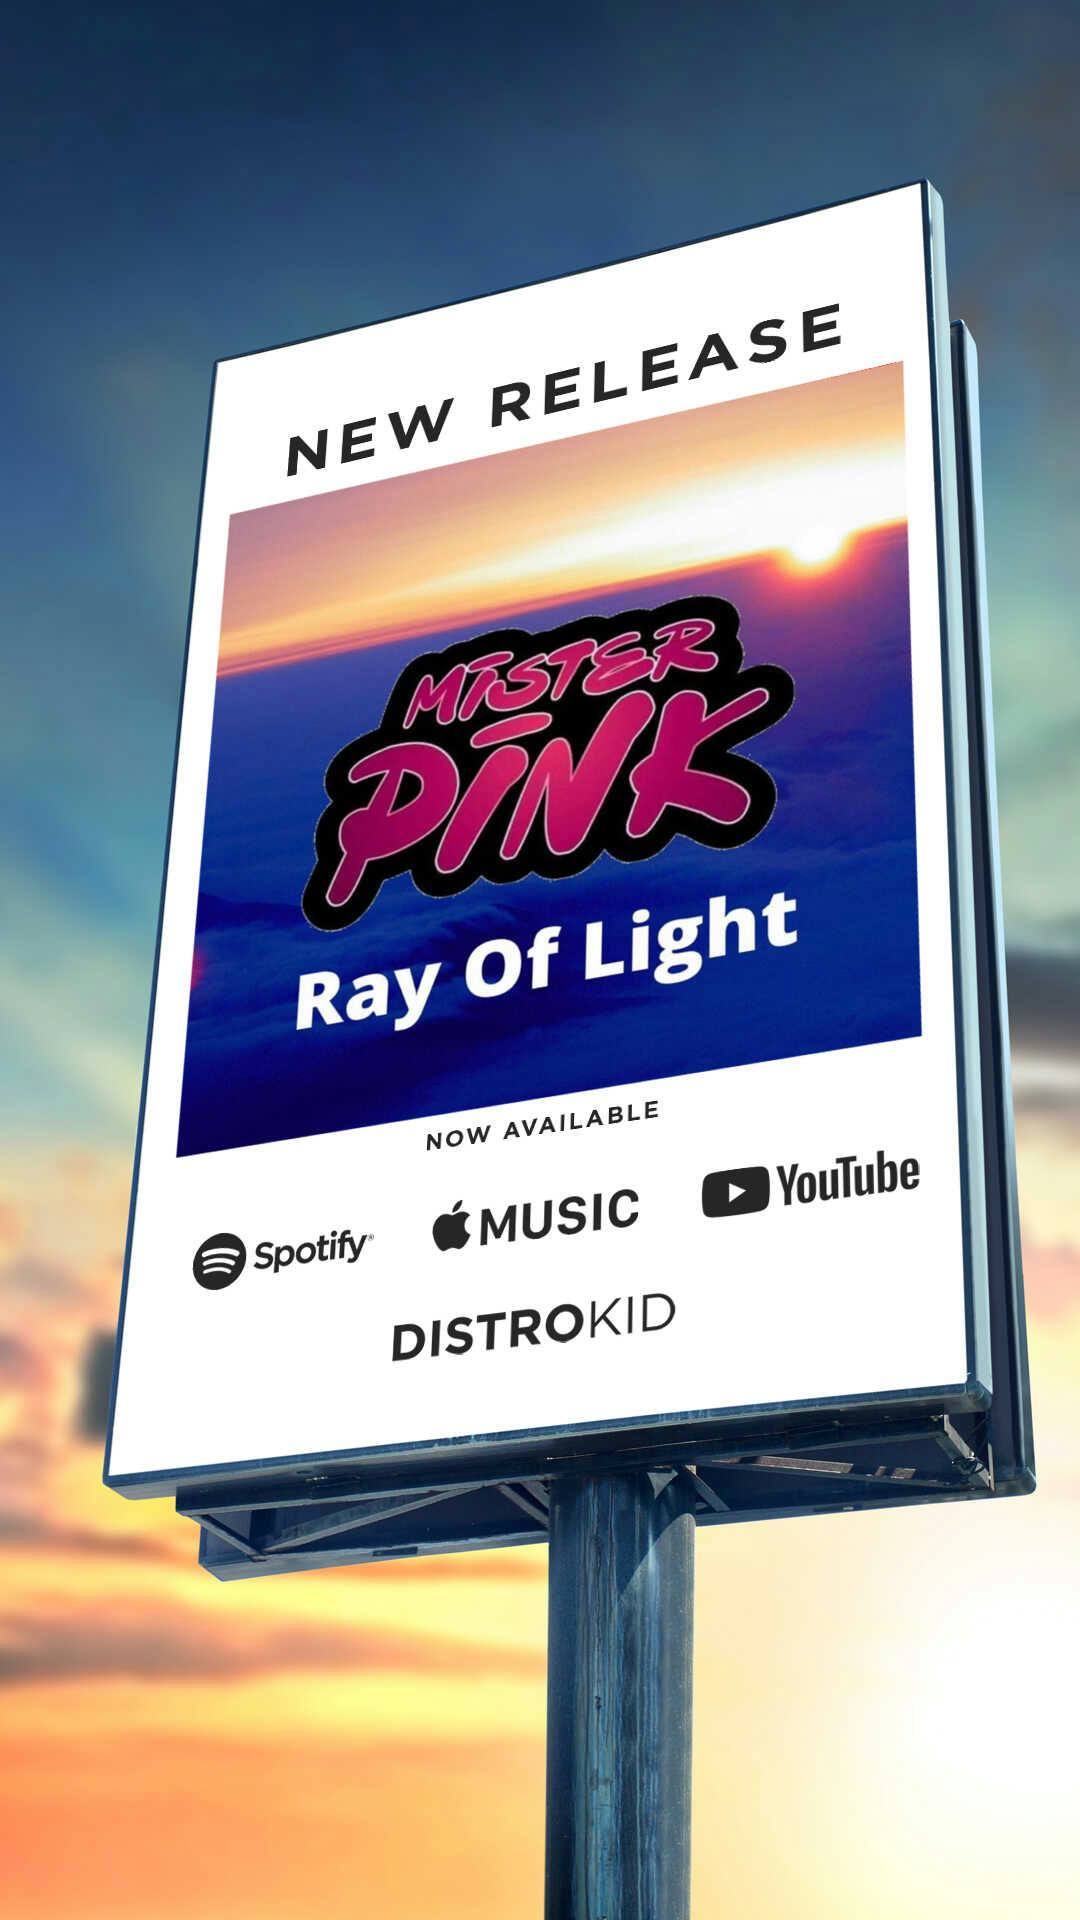 Ray of Light (Hot Mix) by Mister-Pink. Official Video - Top 10 Rock Band Play their Hit 